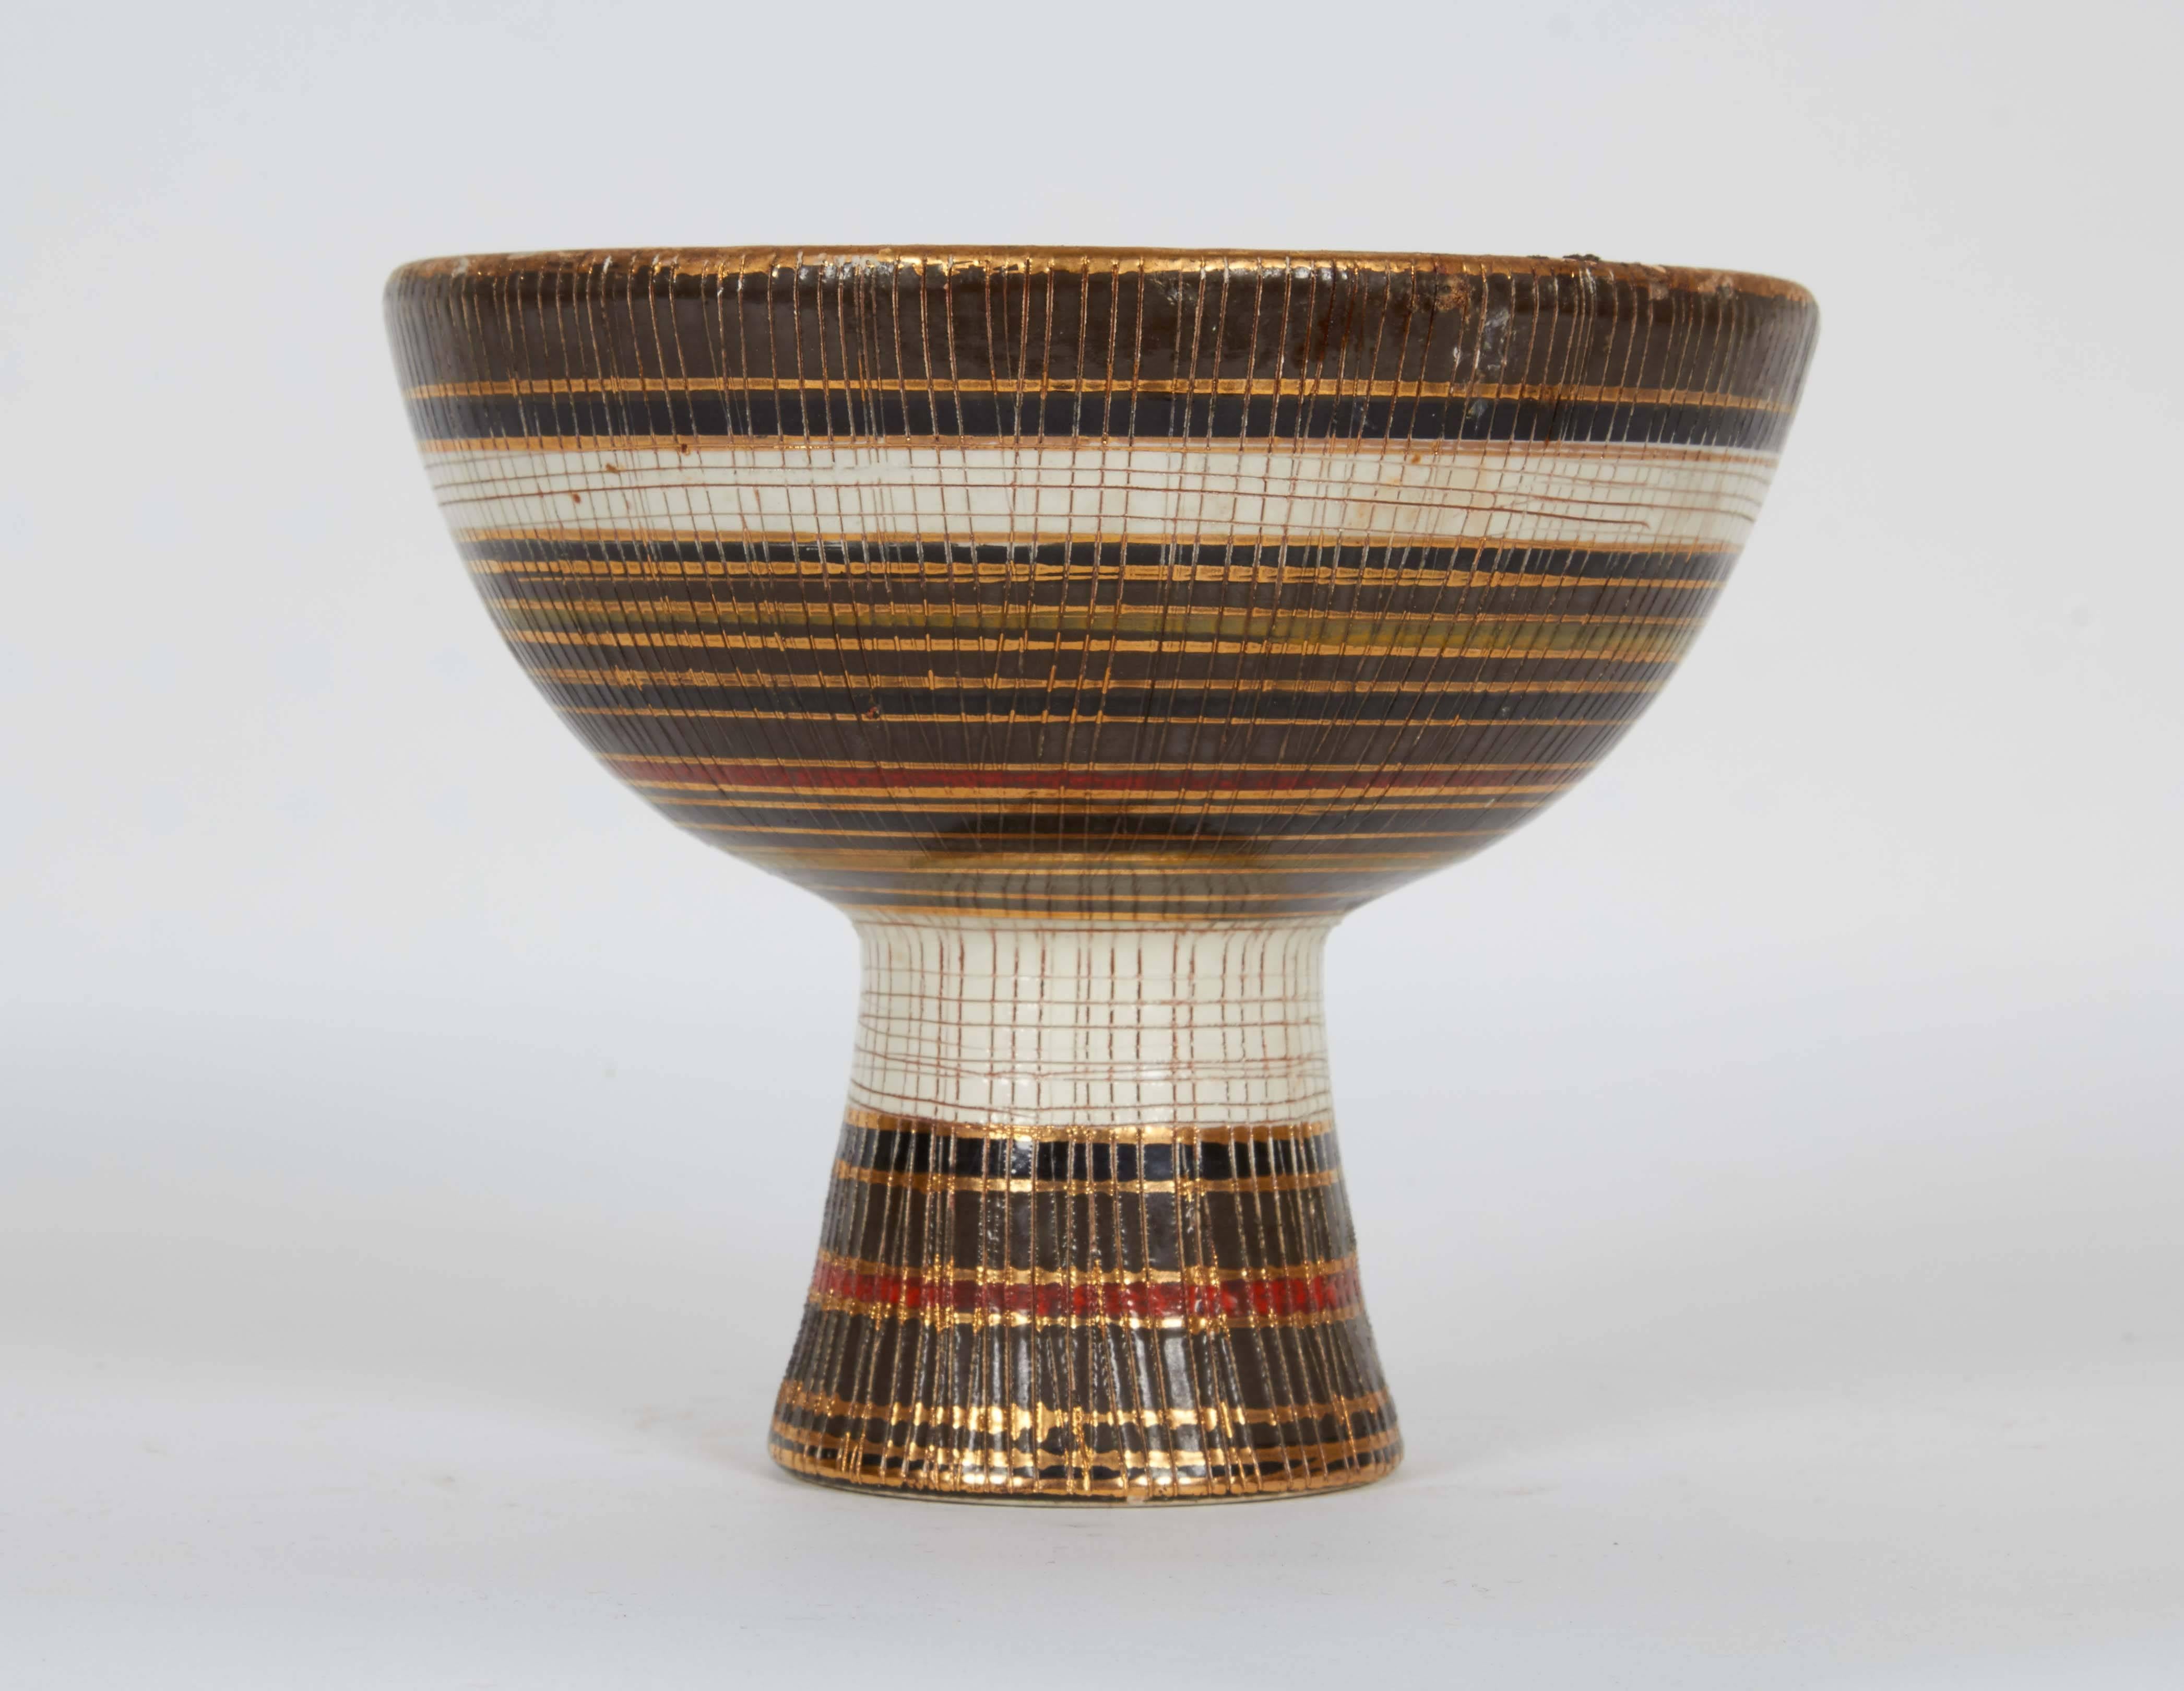 An Italian Sgraffito ceramic footed bowl or planter, produced circa 1960s by Bitossi from the 'Seta' series, the glaze, in horizontal bands of browns, black, white and red, accented with gilding and decorated with criss-cross incising. Signed to